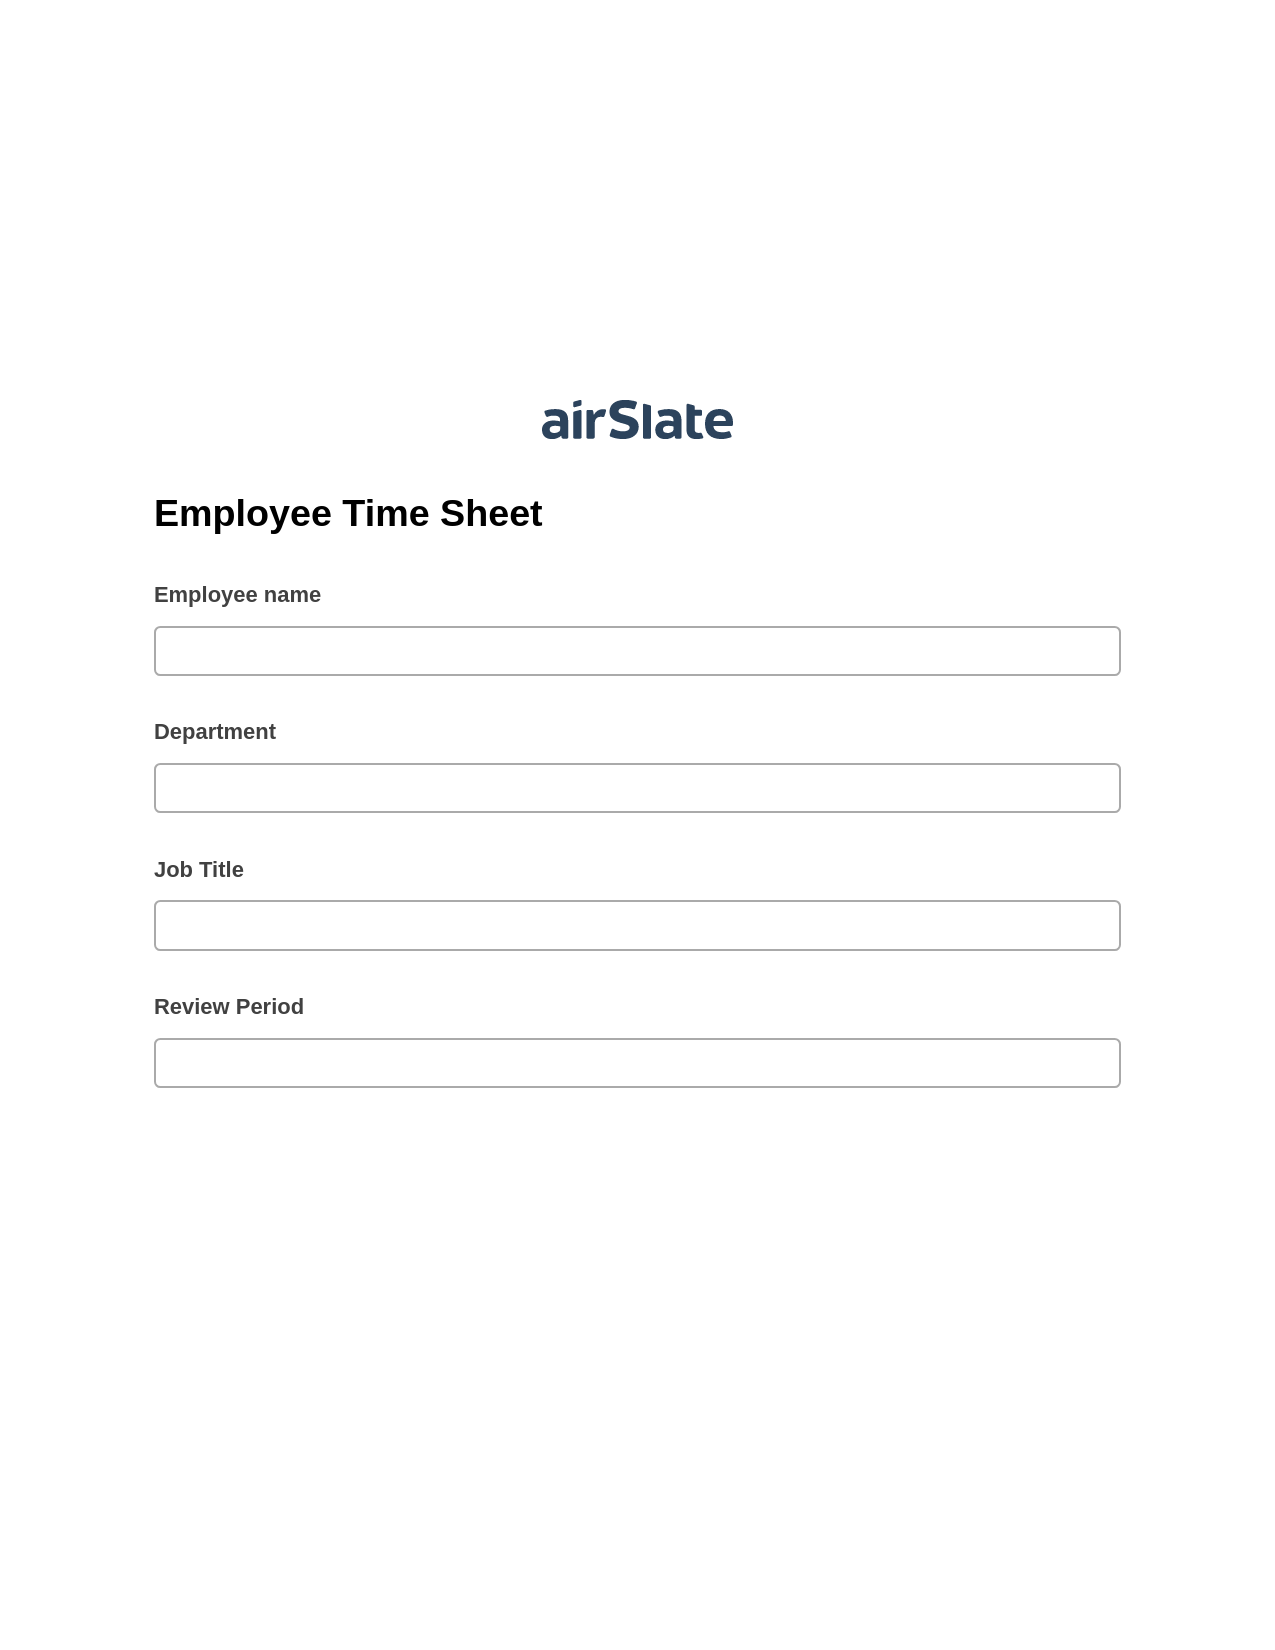 Employee Time Sheet Pre-fill from Excel Spreadsheet Bot, Unassign Role Bot, Archive to Dropbox Bot